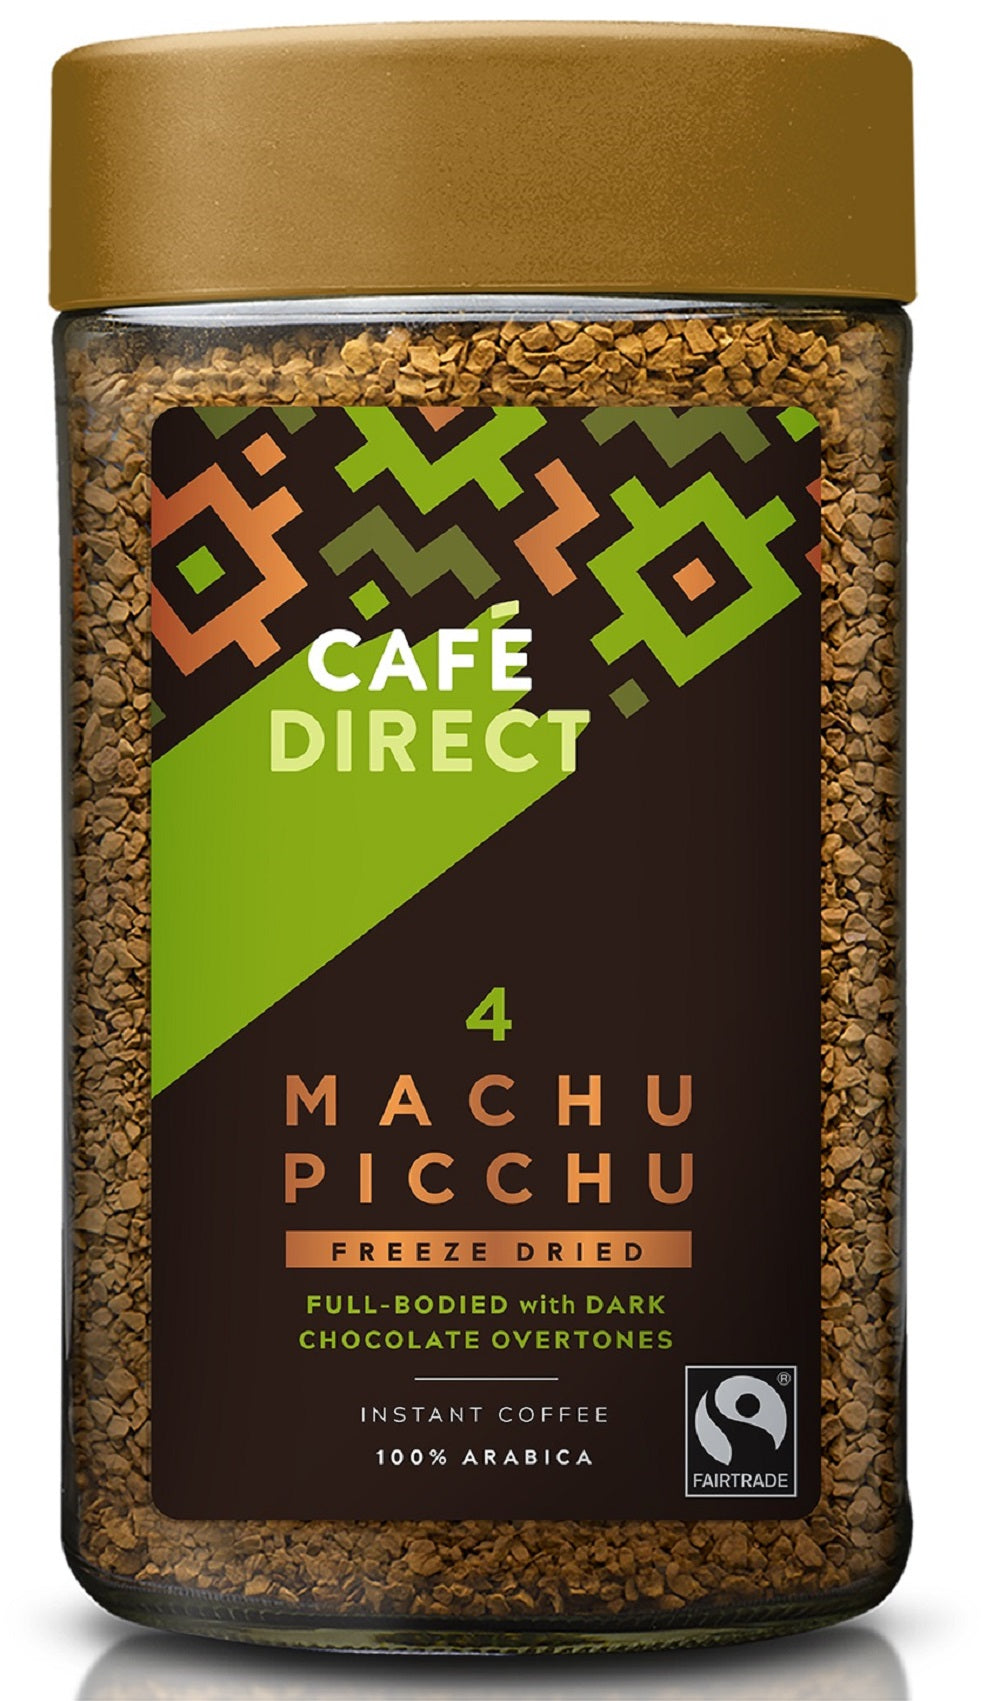 Cafe Direct Machu Picchu FT Instant Freeze Dried Coffee 100g